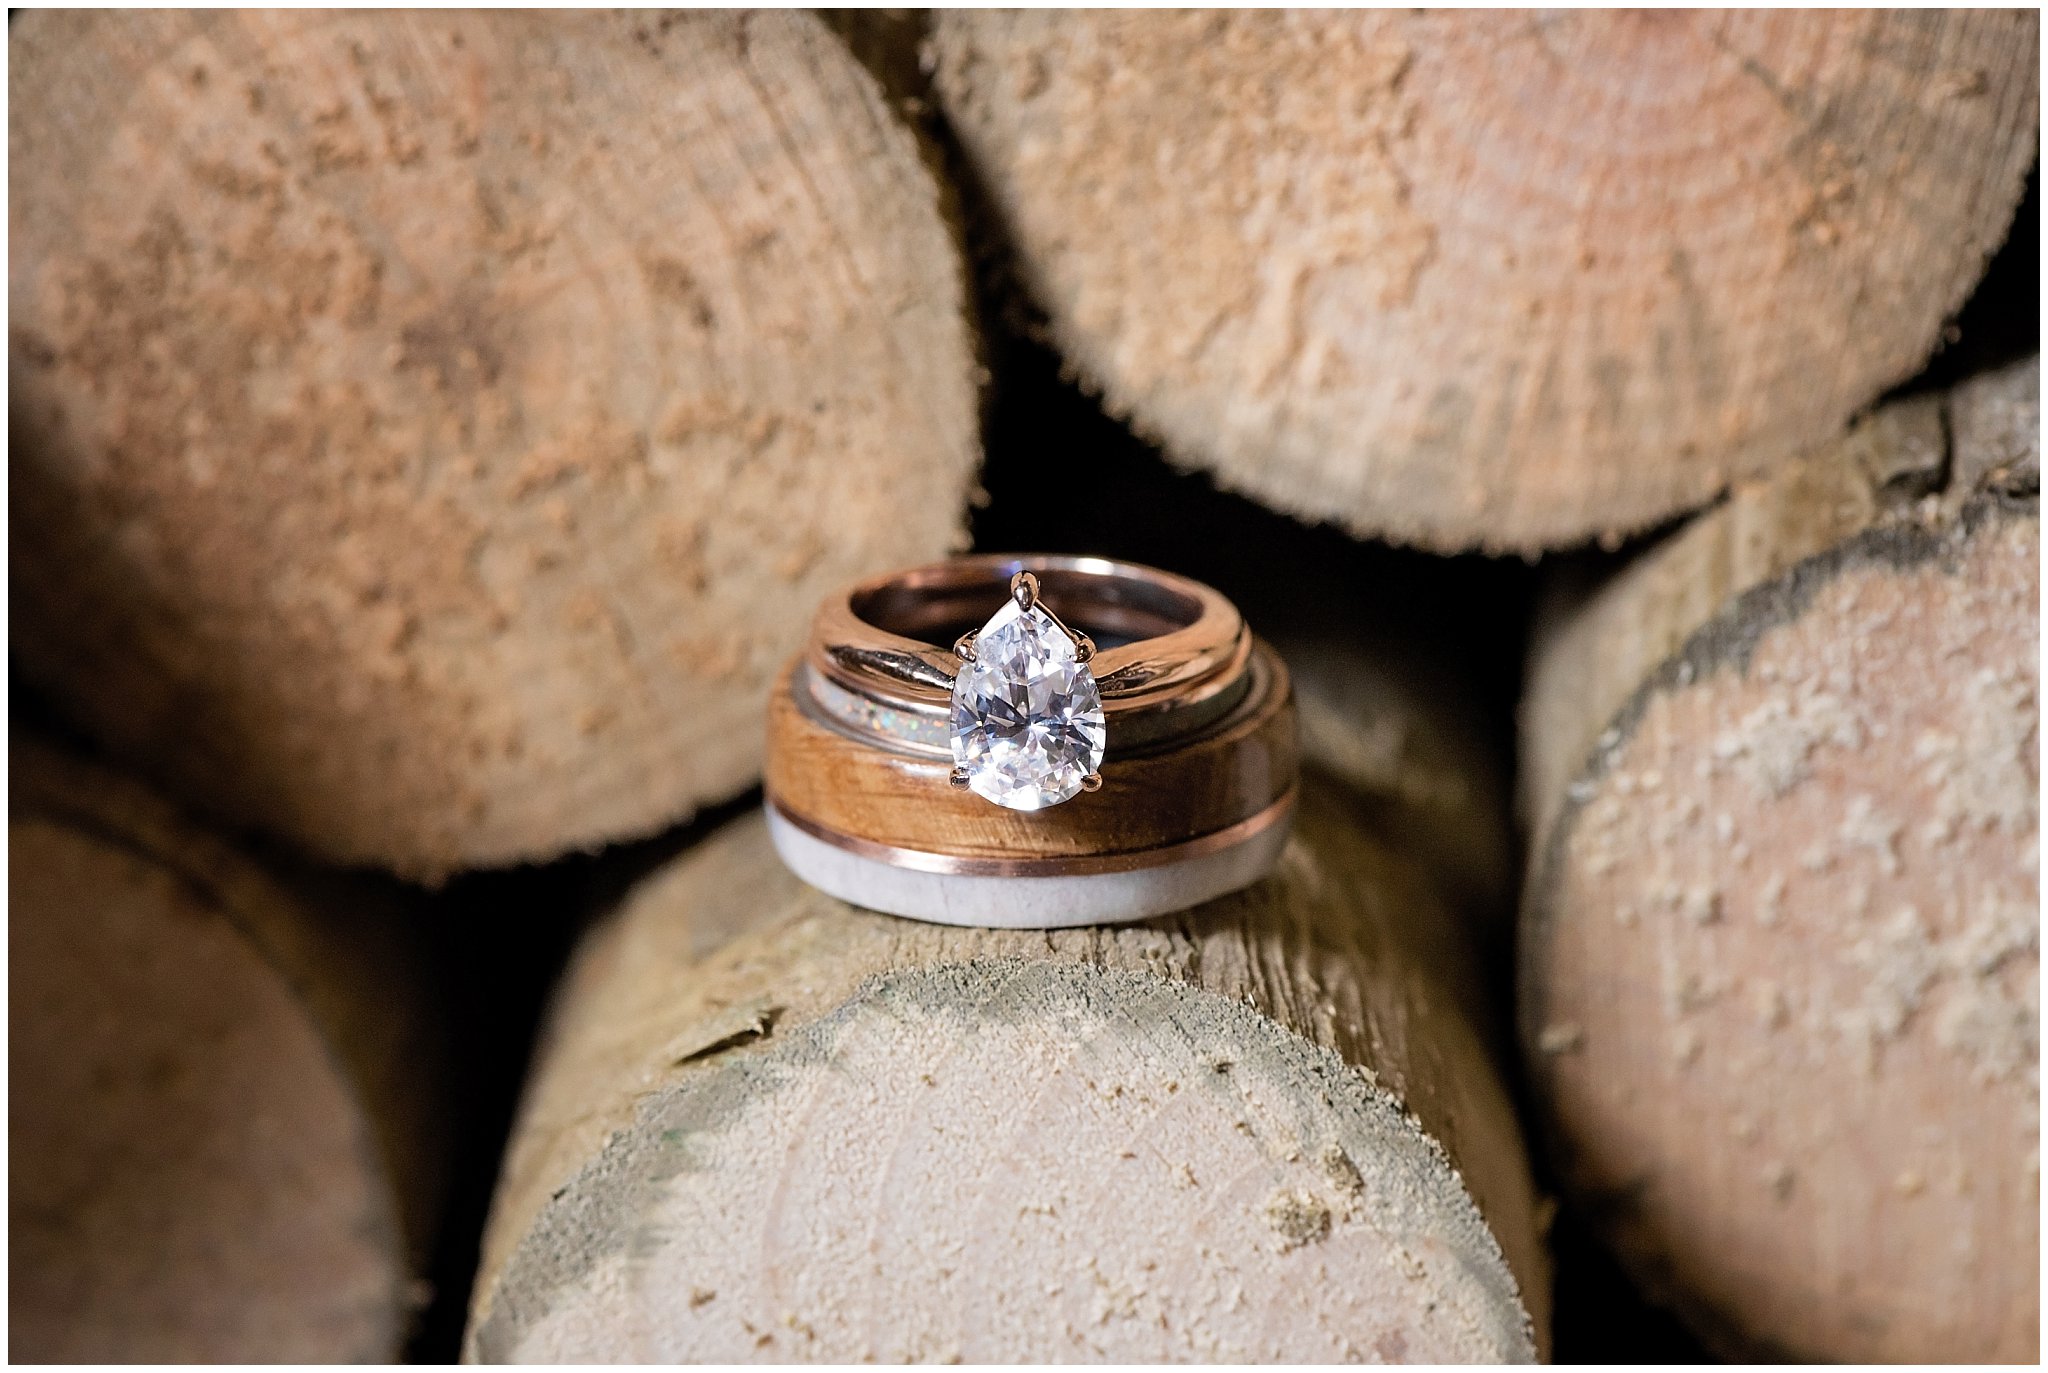 Custom wedding and engagement rings based out of Ogden, Utah. Photographed by Jessie and Dallin Photography